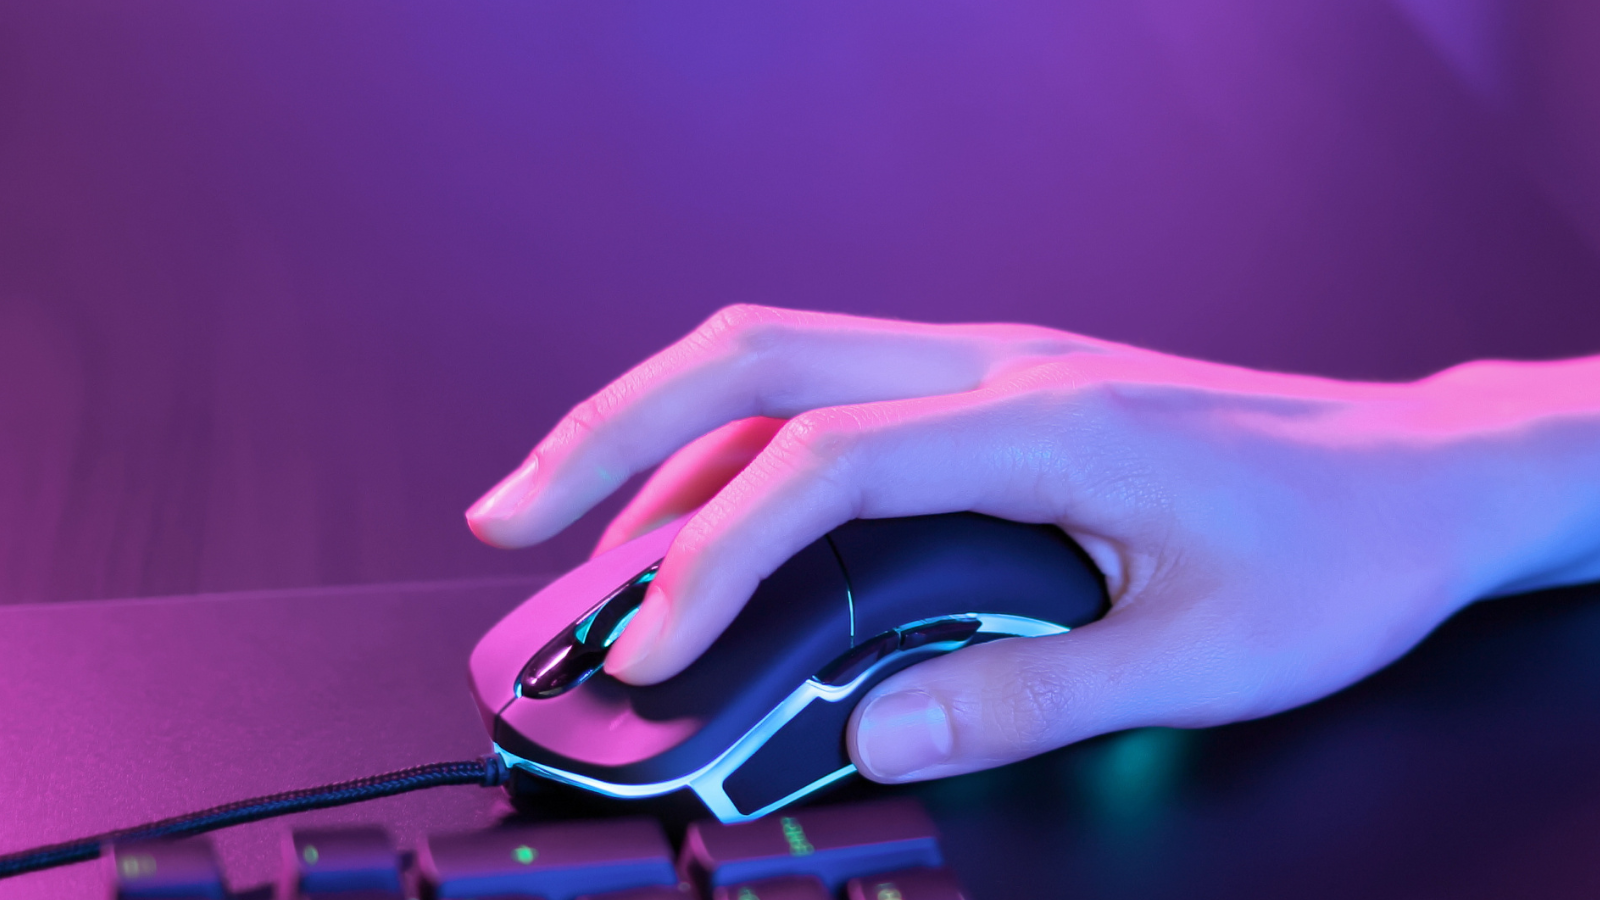 Understanding DPI and How to Get the Most Out of Your Gaming Mouse